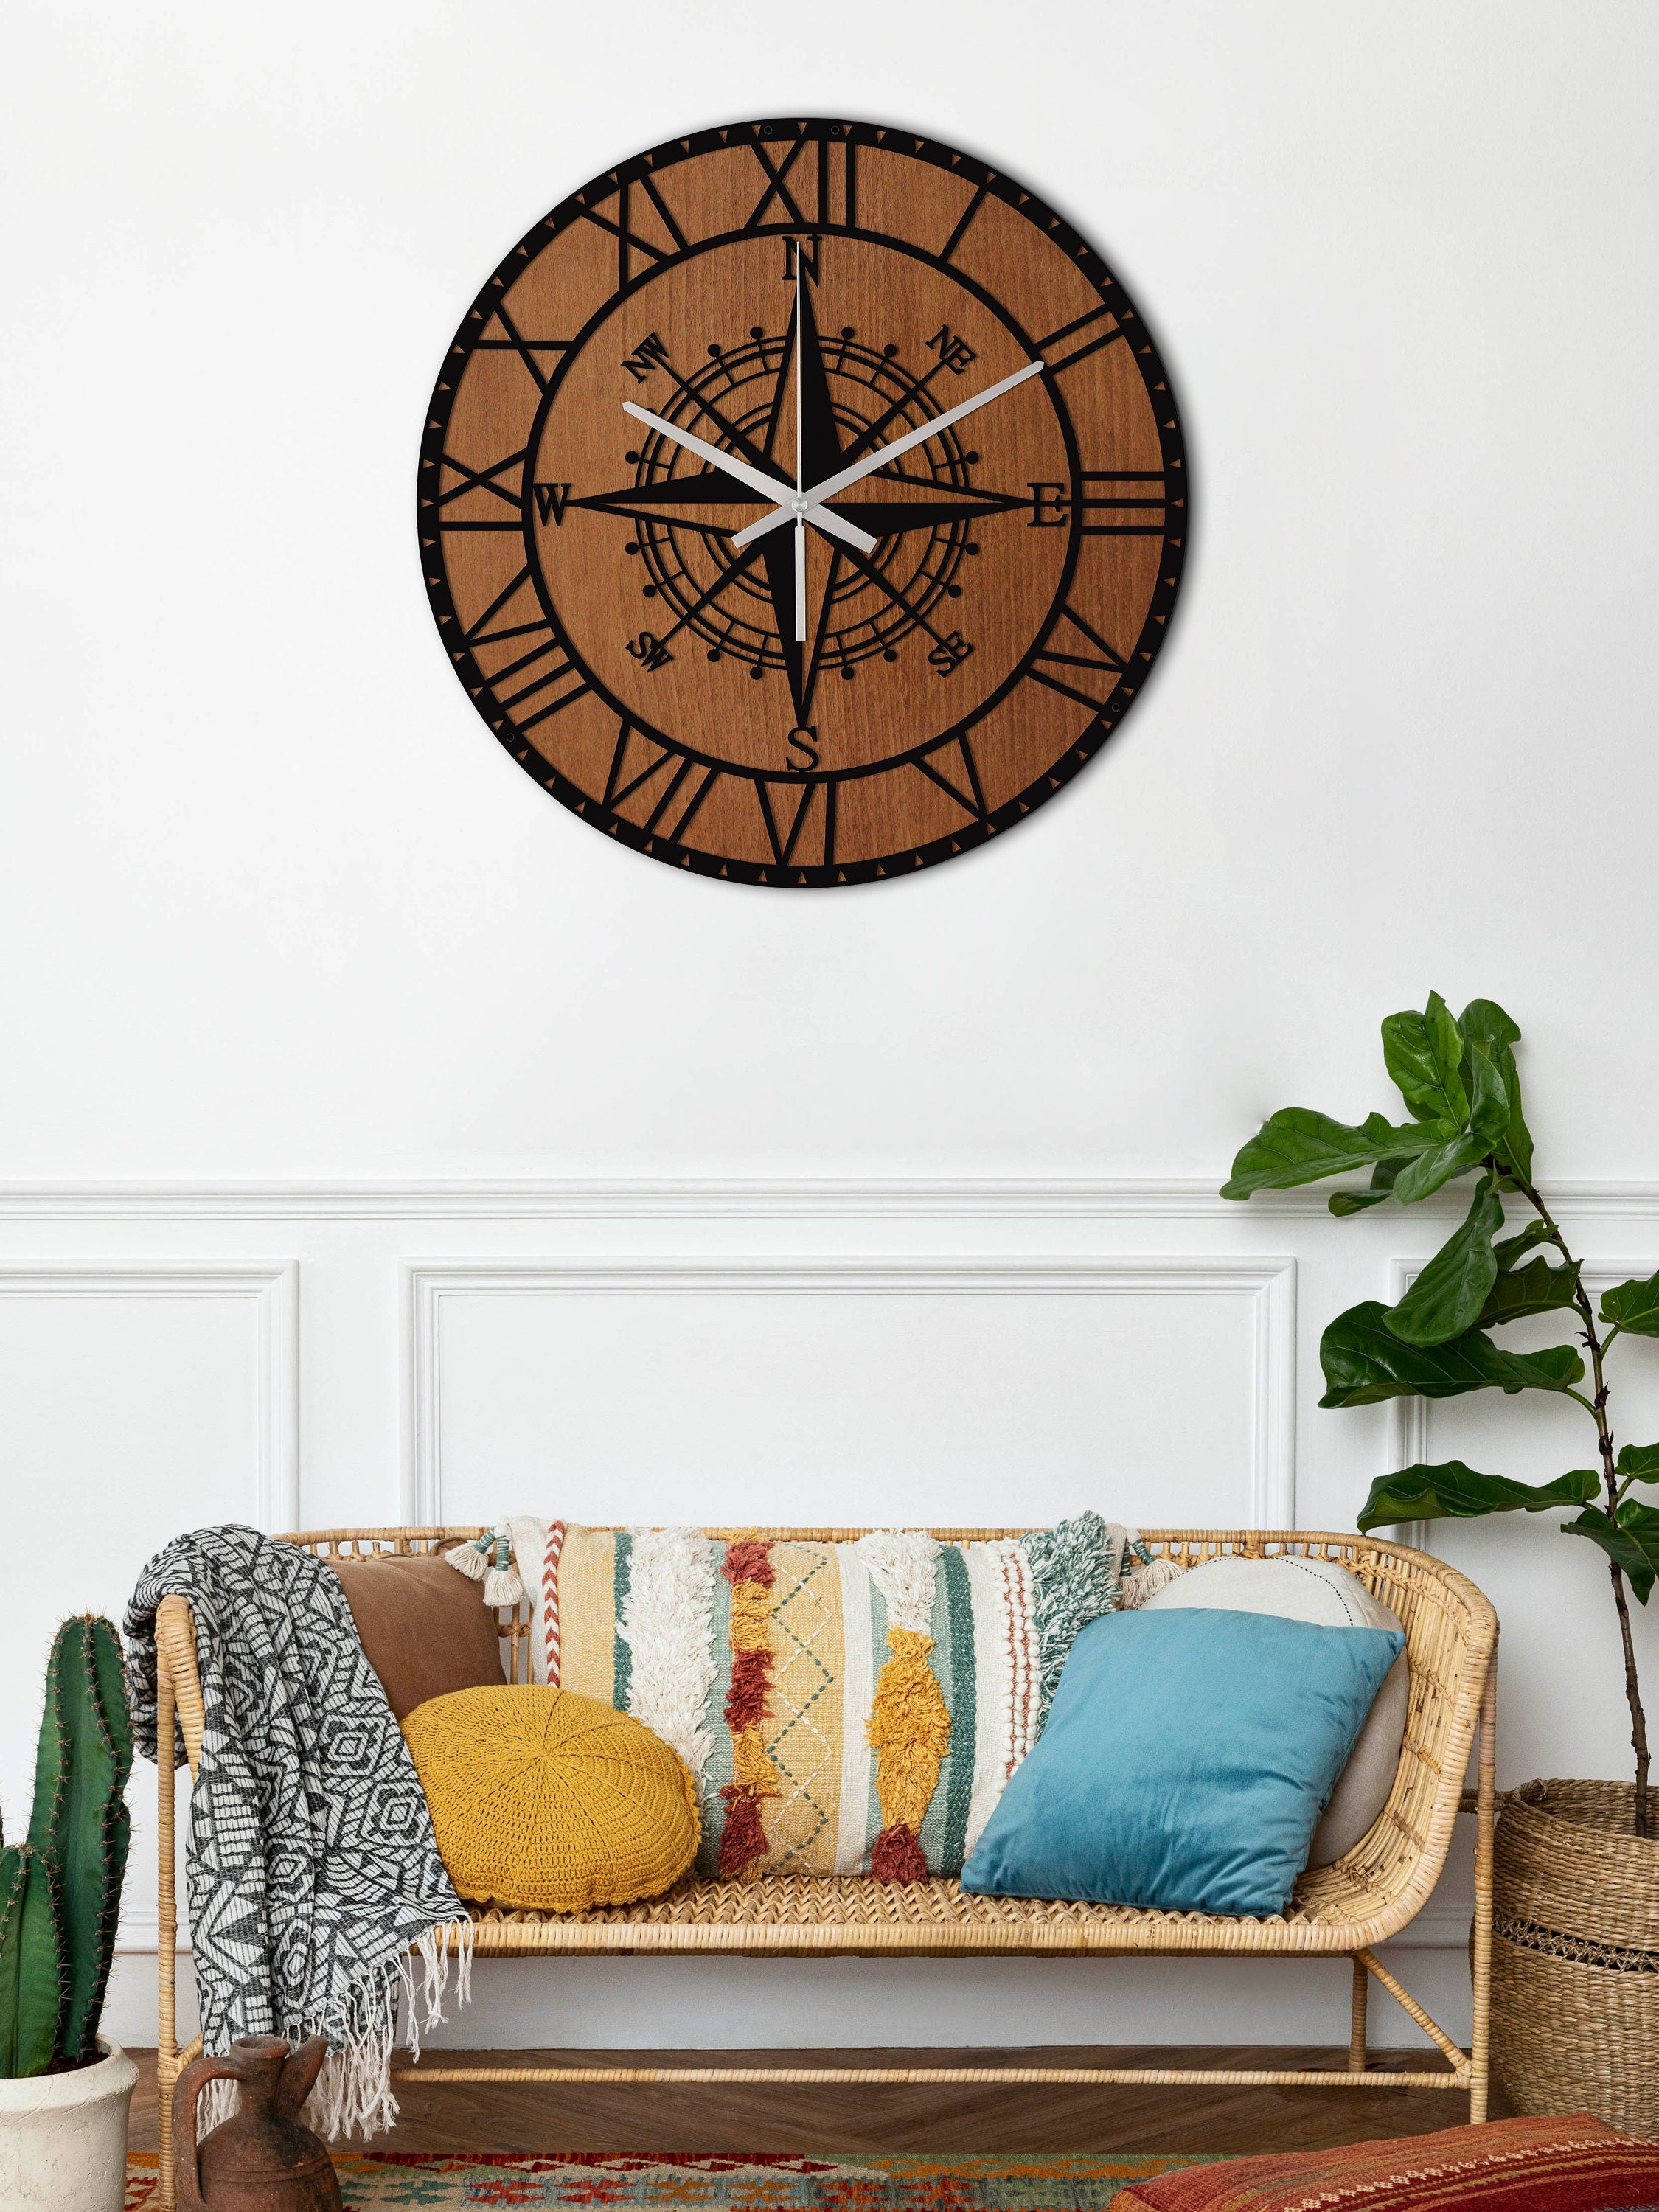 Wooden Metal Wall Clock, Compass Wall Clock, Silent Wall Clock, Oversized Wall Clock, Unique Wall Clock, Small Clock For Wall Home Decore